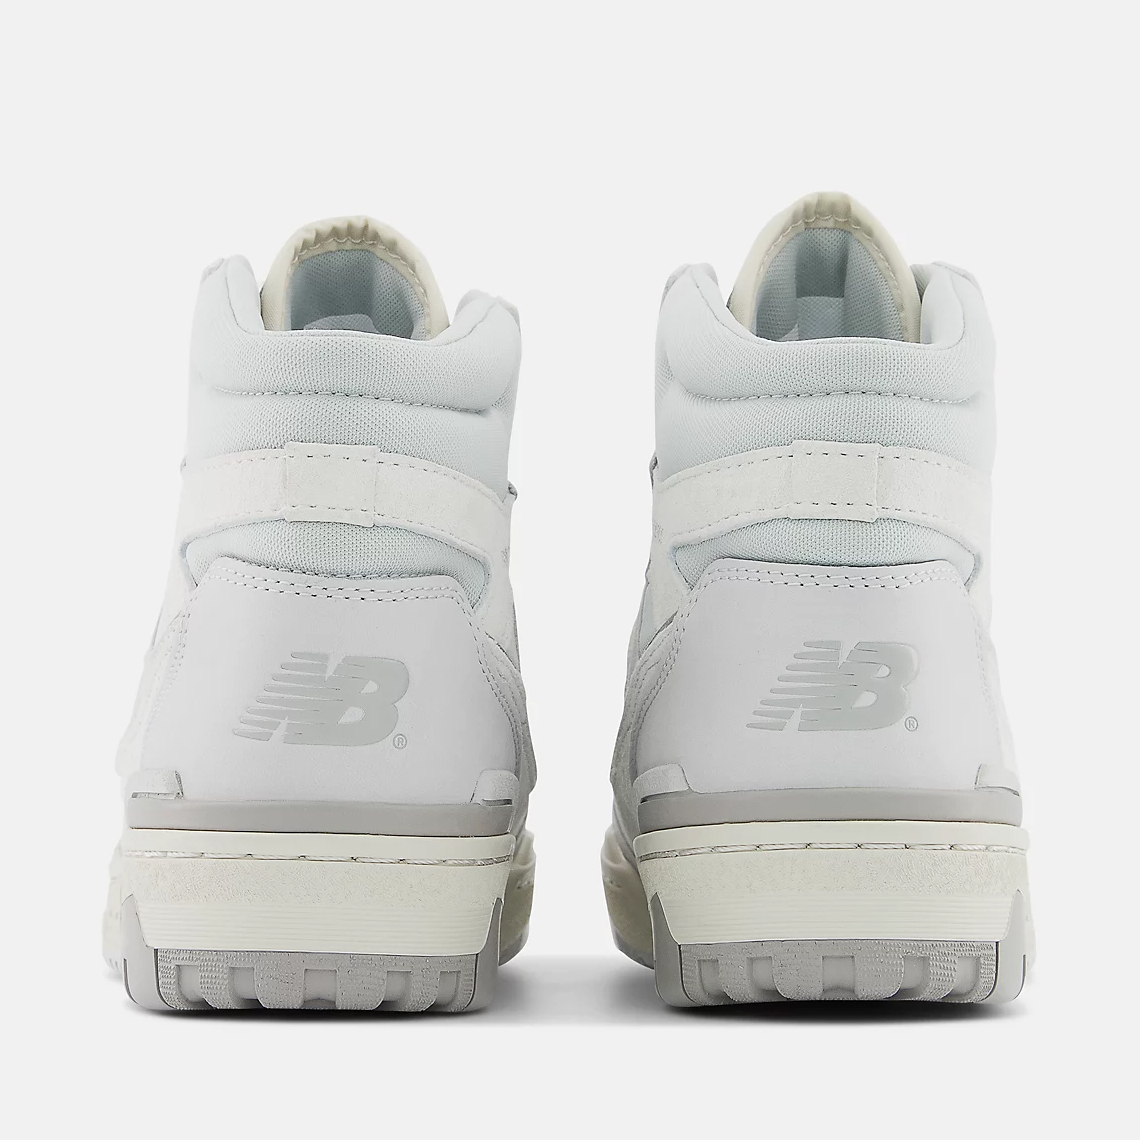 end x new balance m575 marble white available now Light Aluminum Rain Cloud Marblehead Bb650rgg 5